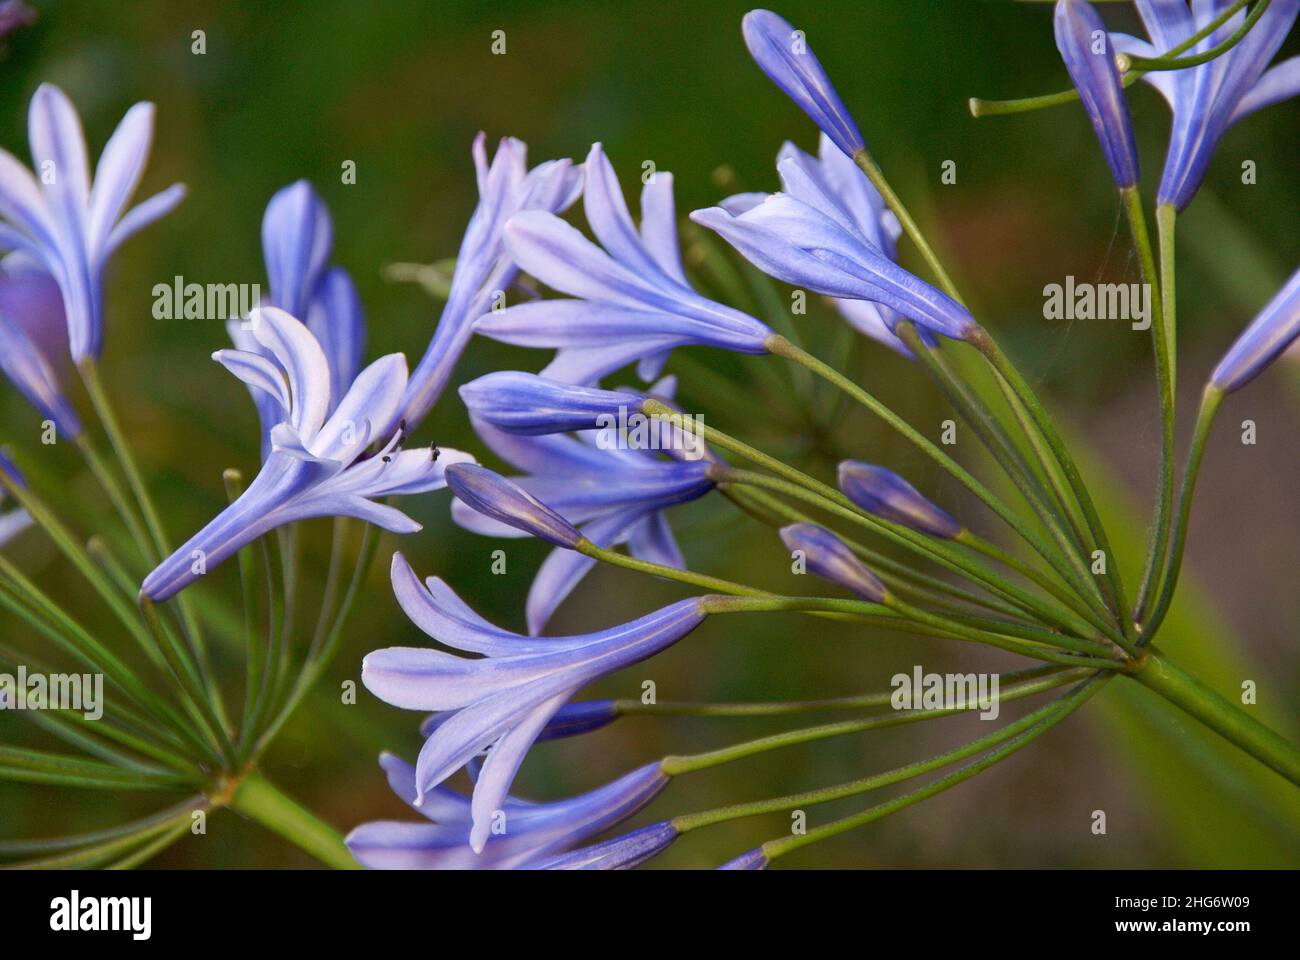 Blue African Lily, agapanthus praecox. Lily of the Nile, close-up Stock Photo